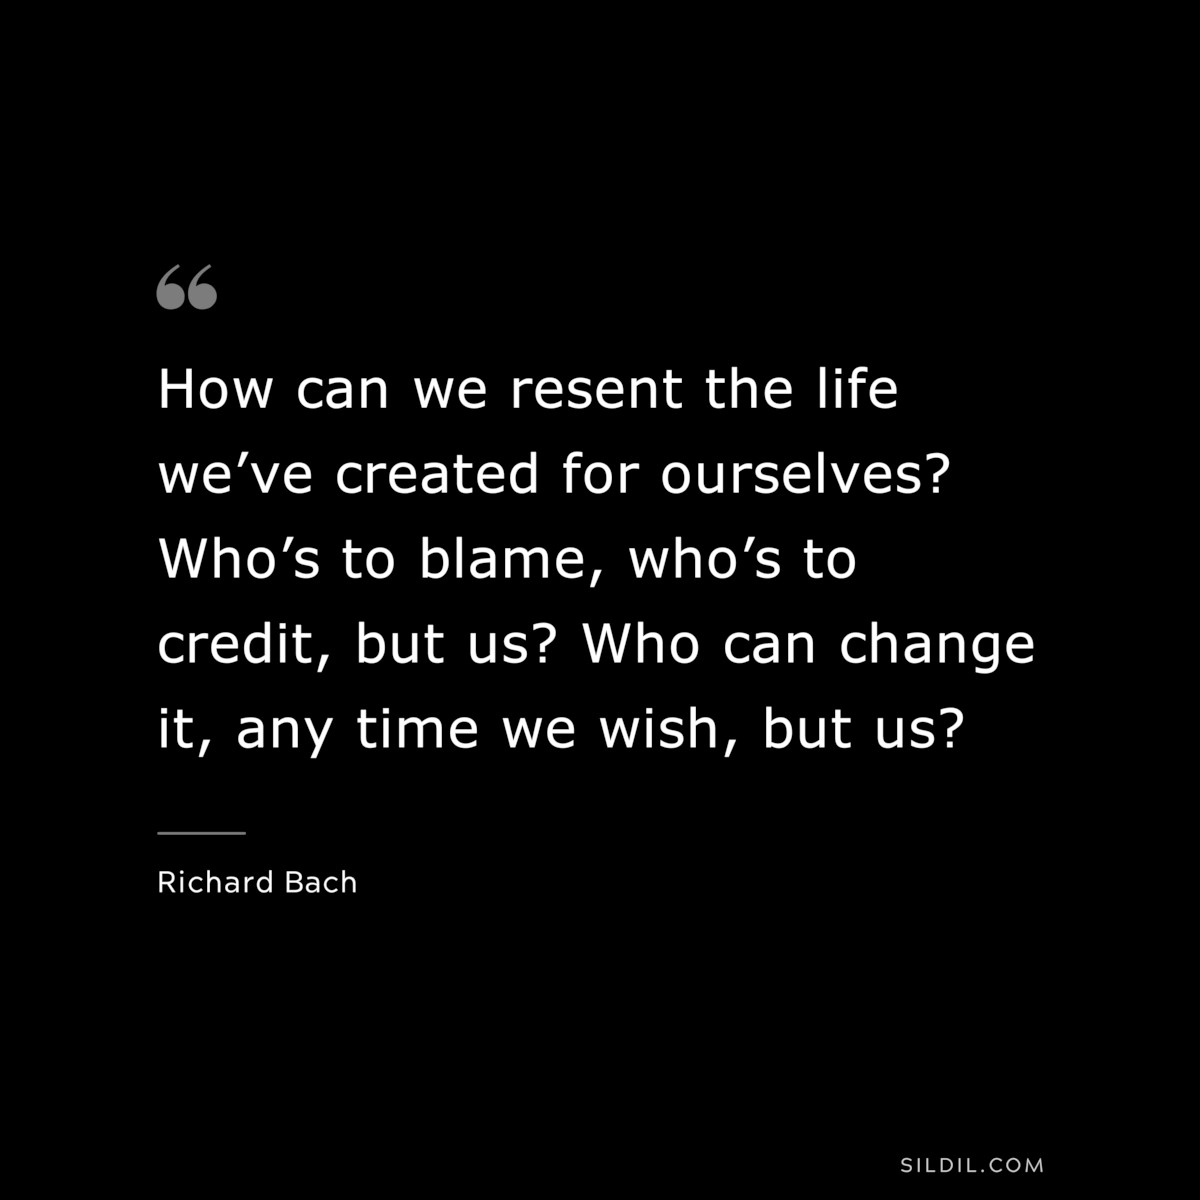 How can we resent the life we’ve created for ourselves? Who’s to blame, who’s to credit, but us? Who can change it, any time we wish, but us? ― Richard Bach